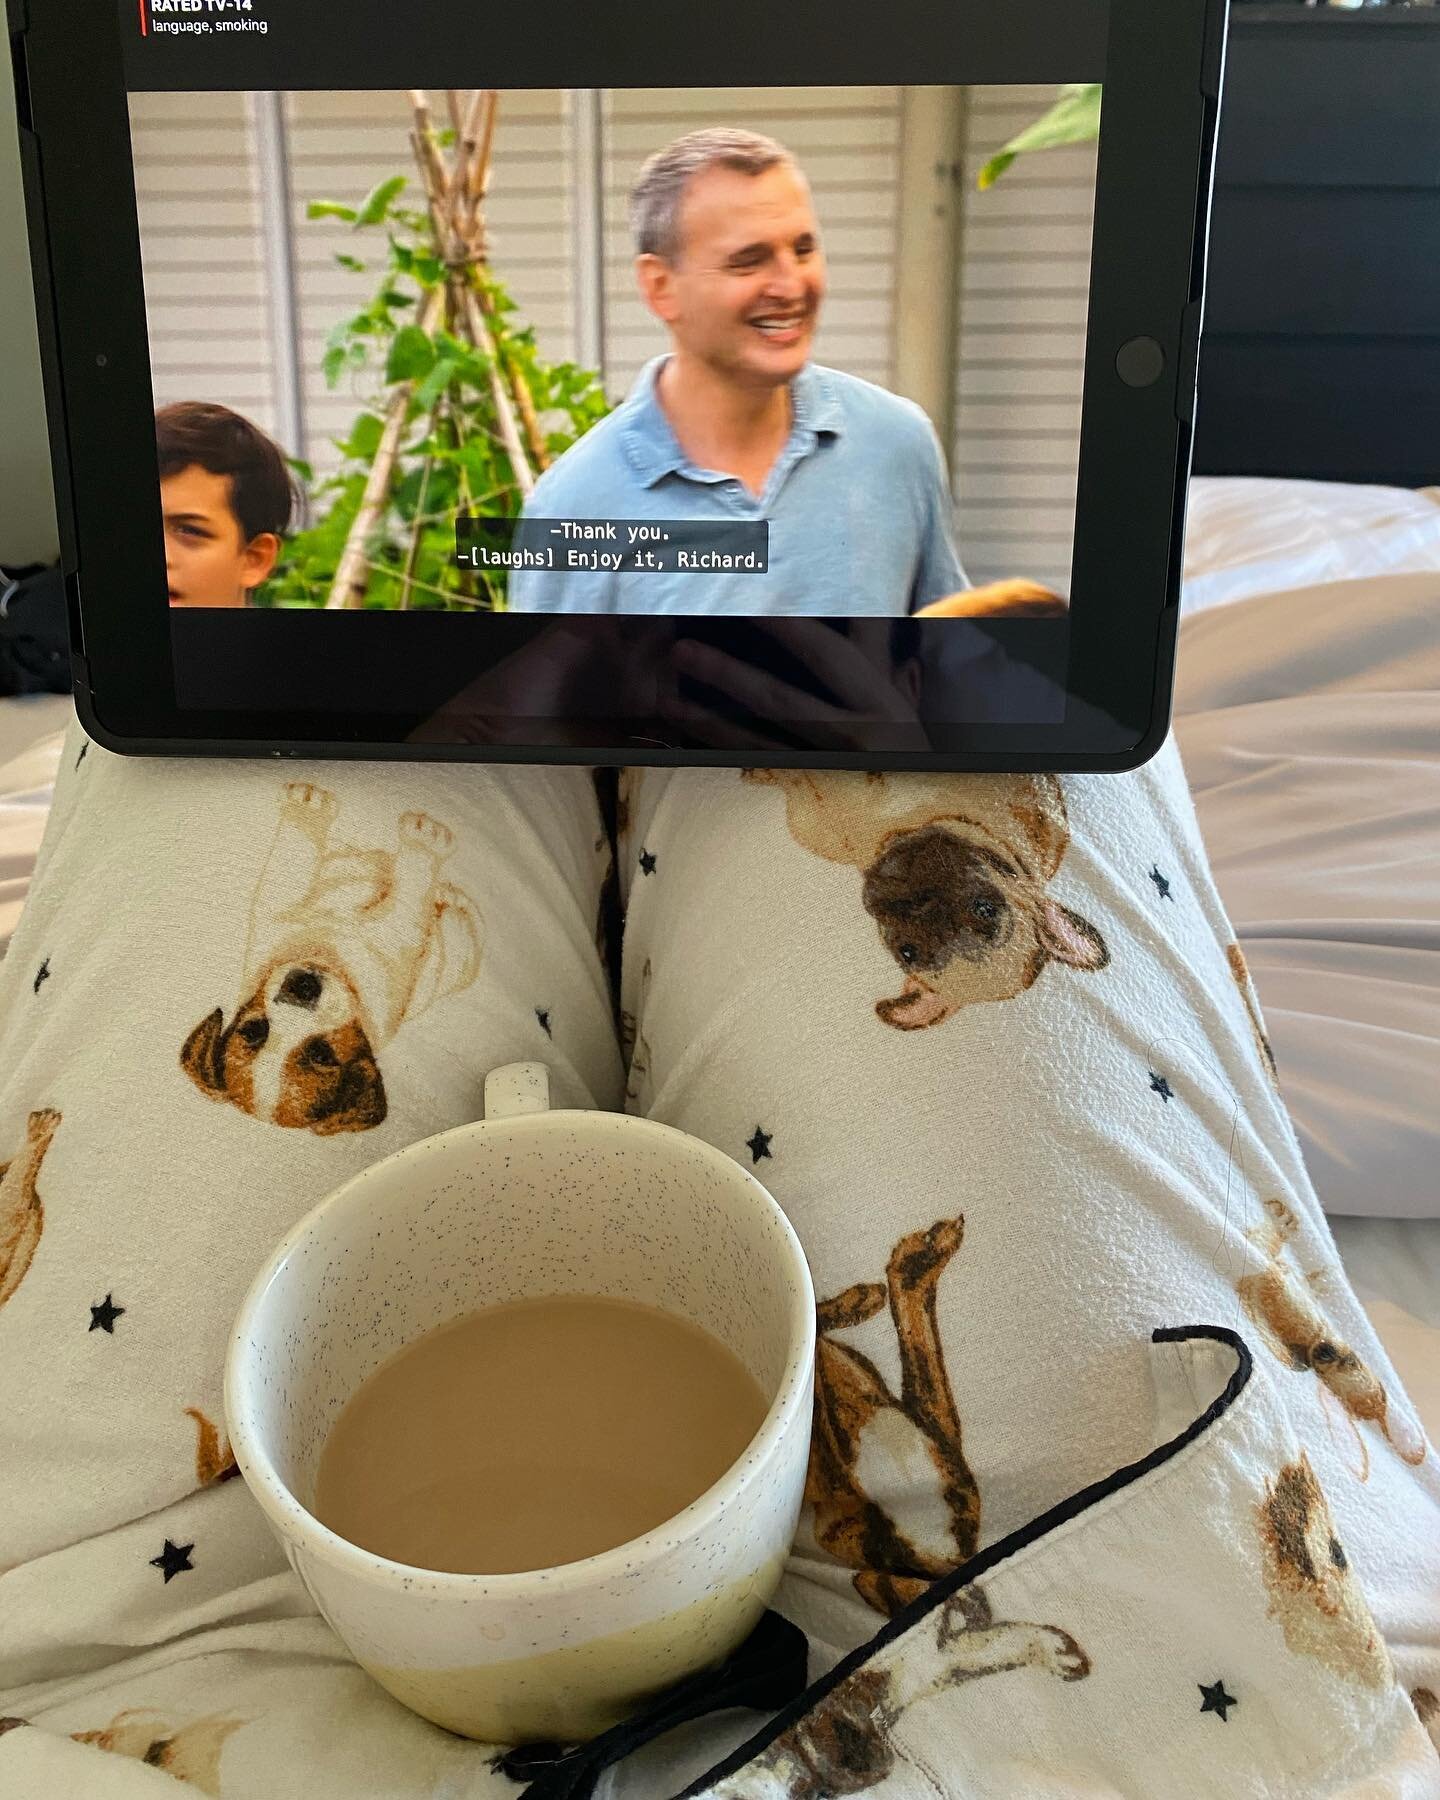 My ideal morning/happy place after a tough week: big mug of heavenly cream, flannel dog pyjamas, and #somebodyfeedphil. 

@sloanetea @pjsalvage @leboudoir_fit @phil.rosenthal